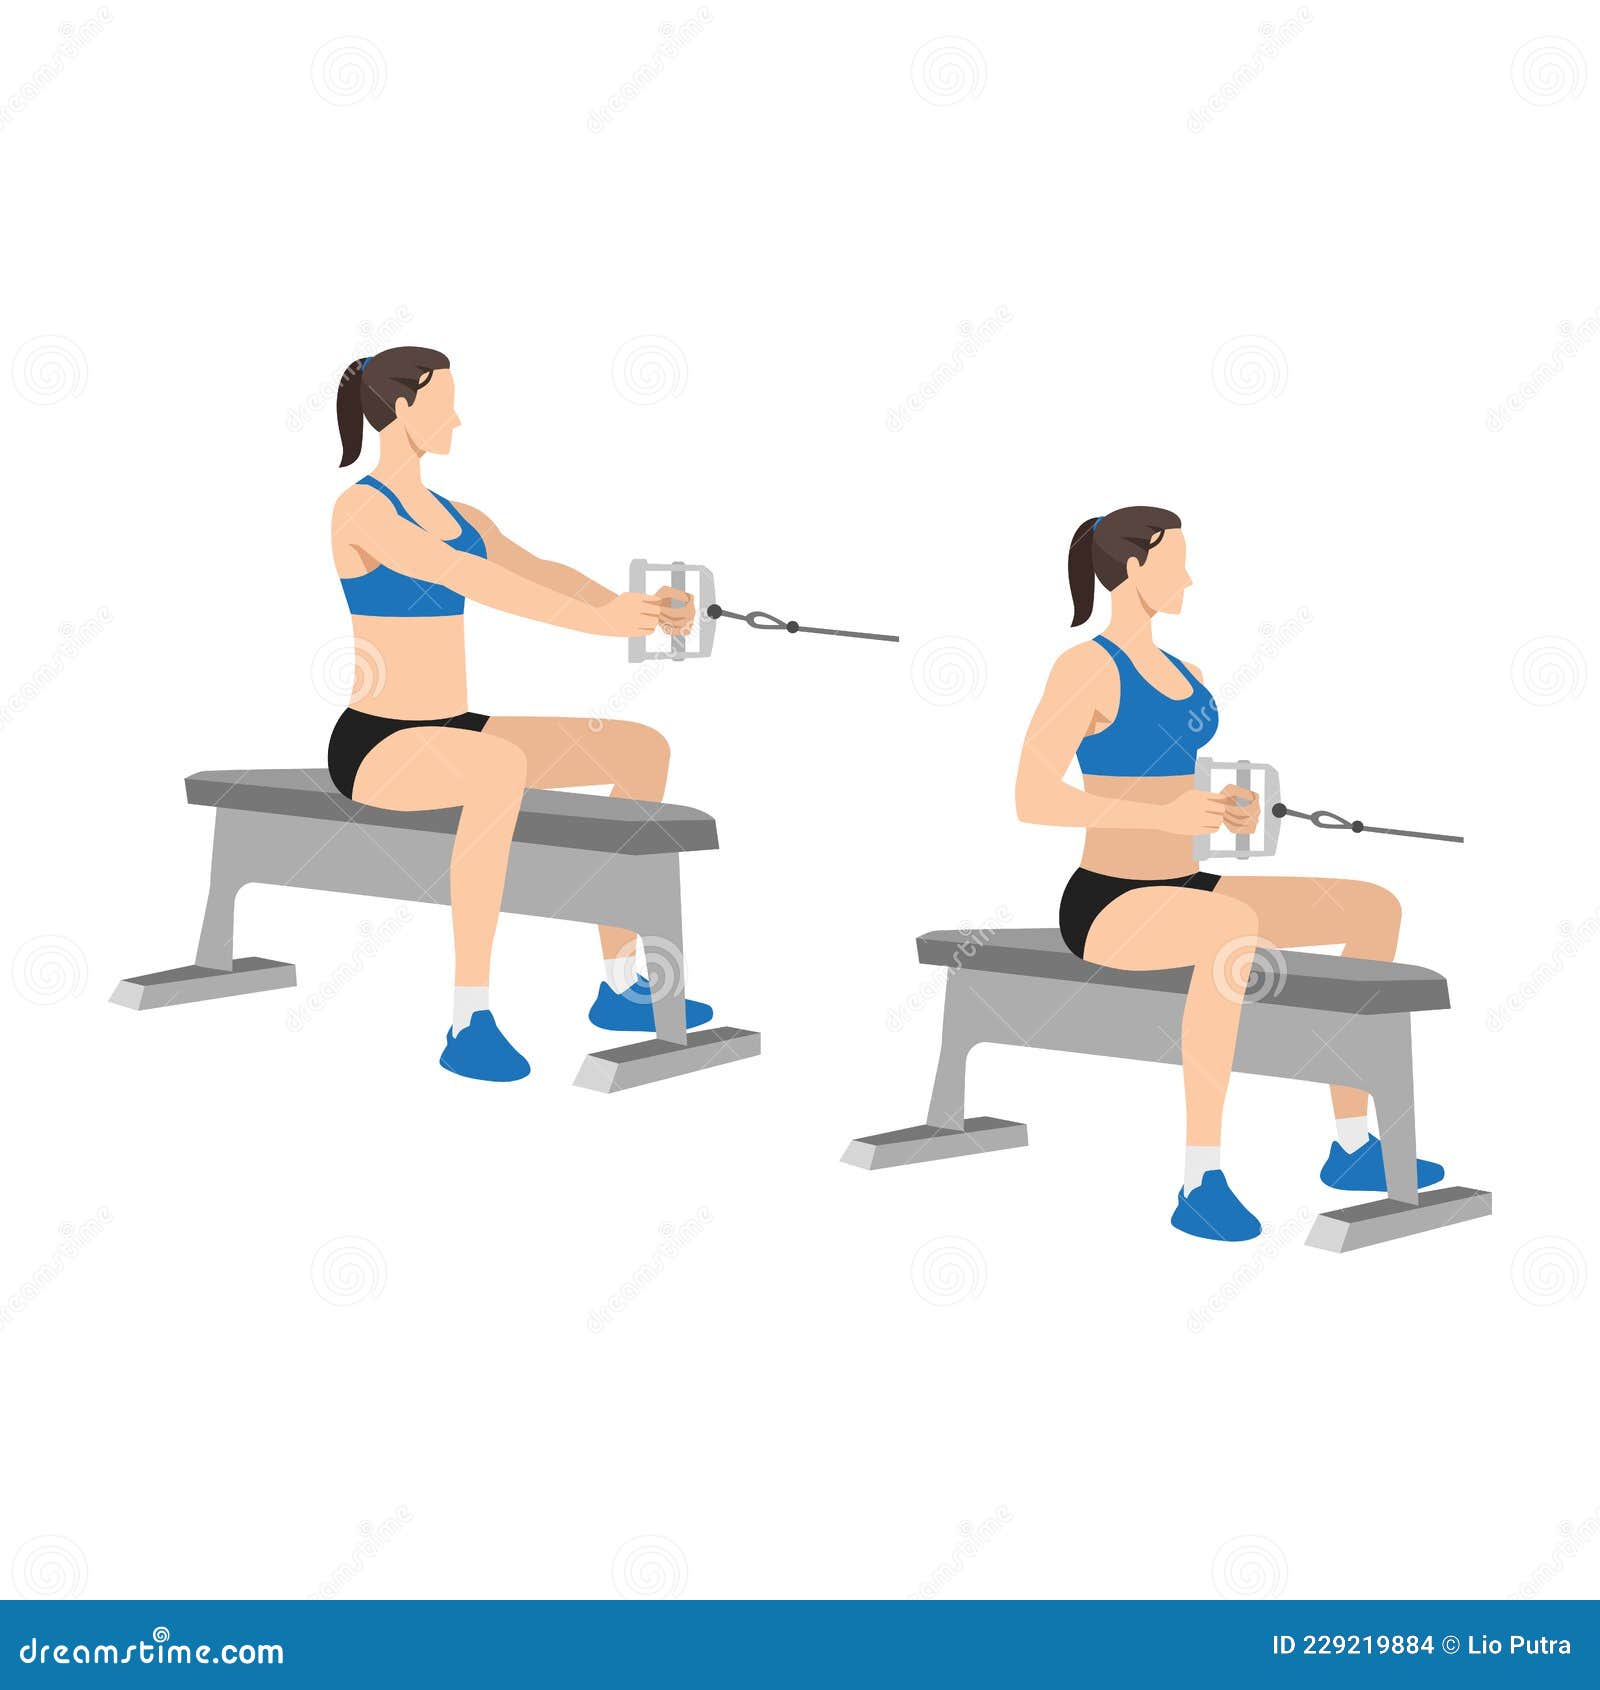 woman doing seated low cable back rows exercise.